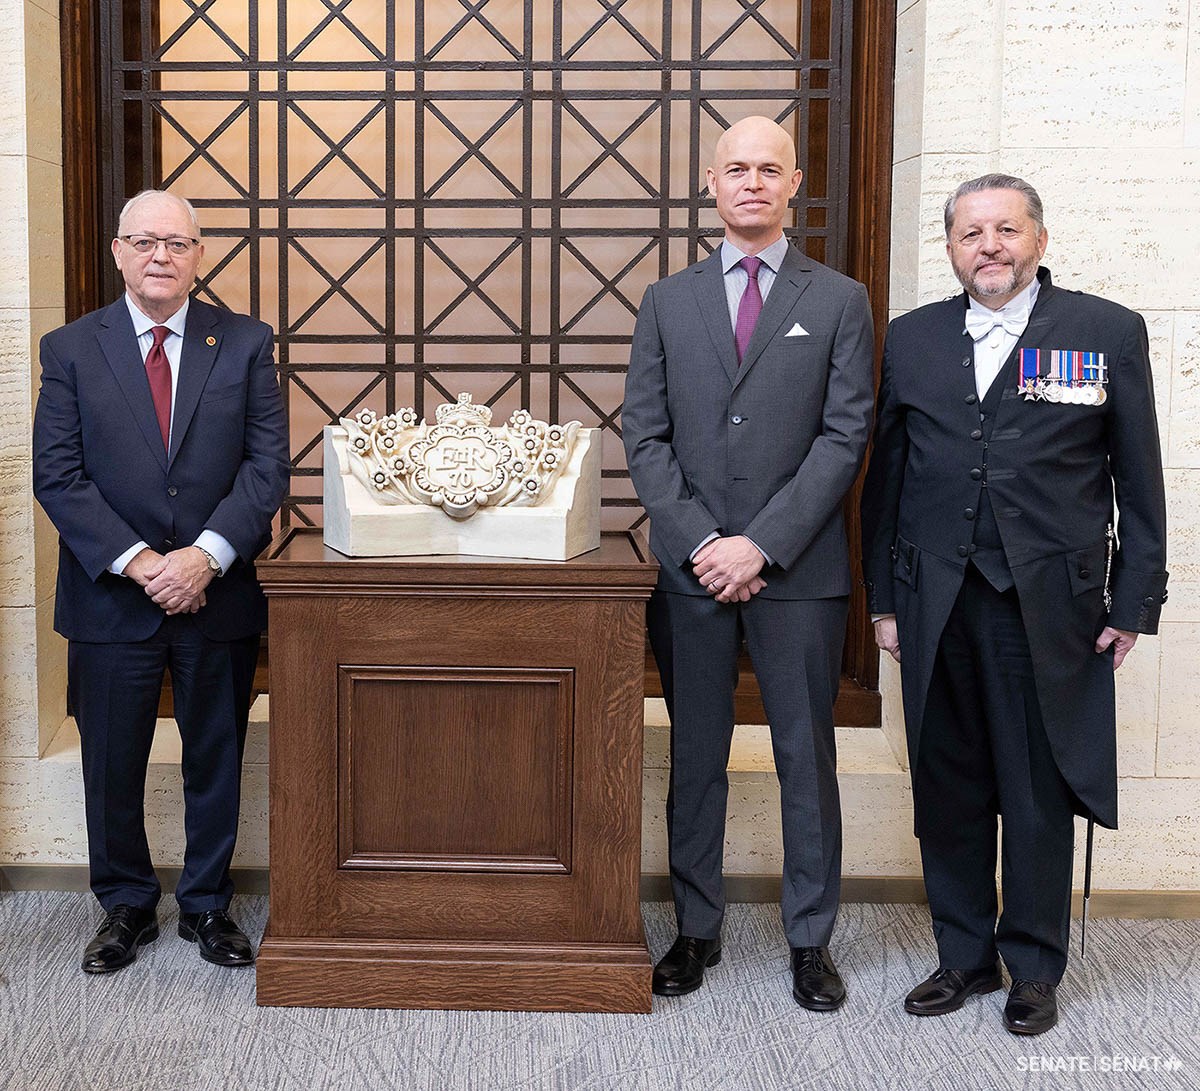 From left to right, Senate Speaker George J. Furey, Dominion Sculptor John-Philippe Smith and Usher of the Black Rod J. Greg Peters unveil the maquette in a ceremony at the Senate of Canada Building in December 2022.